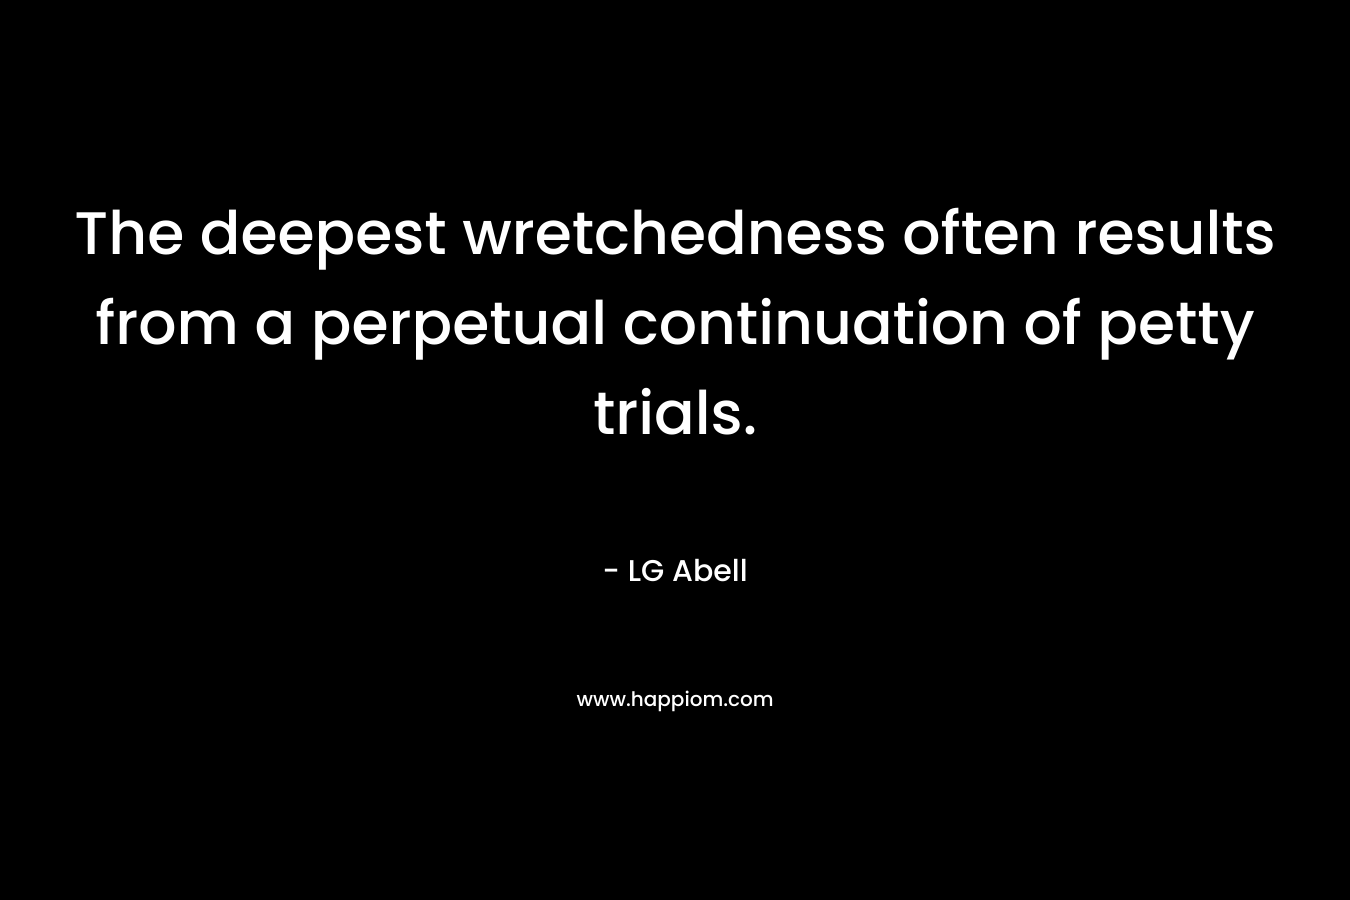 The deepest wretchedness often results from a perpetual continuation of petty trials. – LG Abell